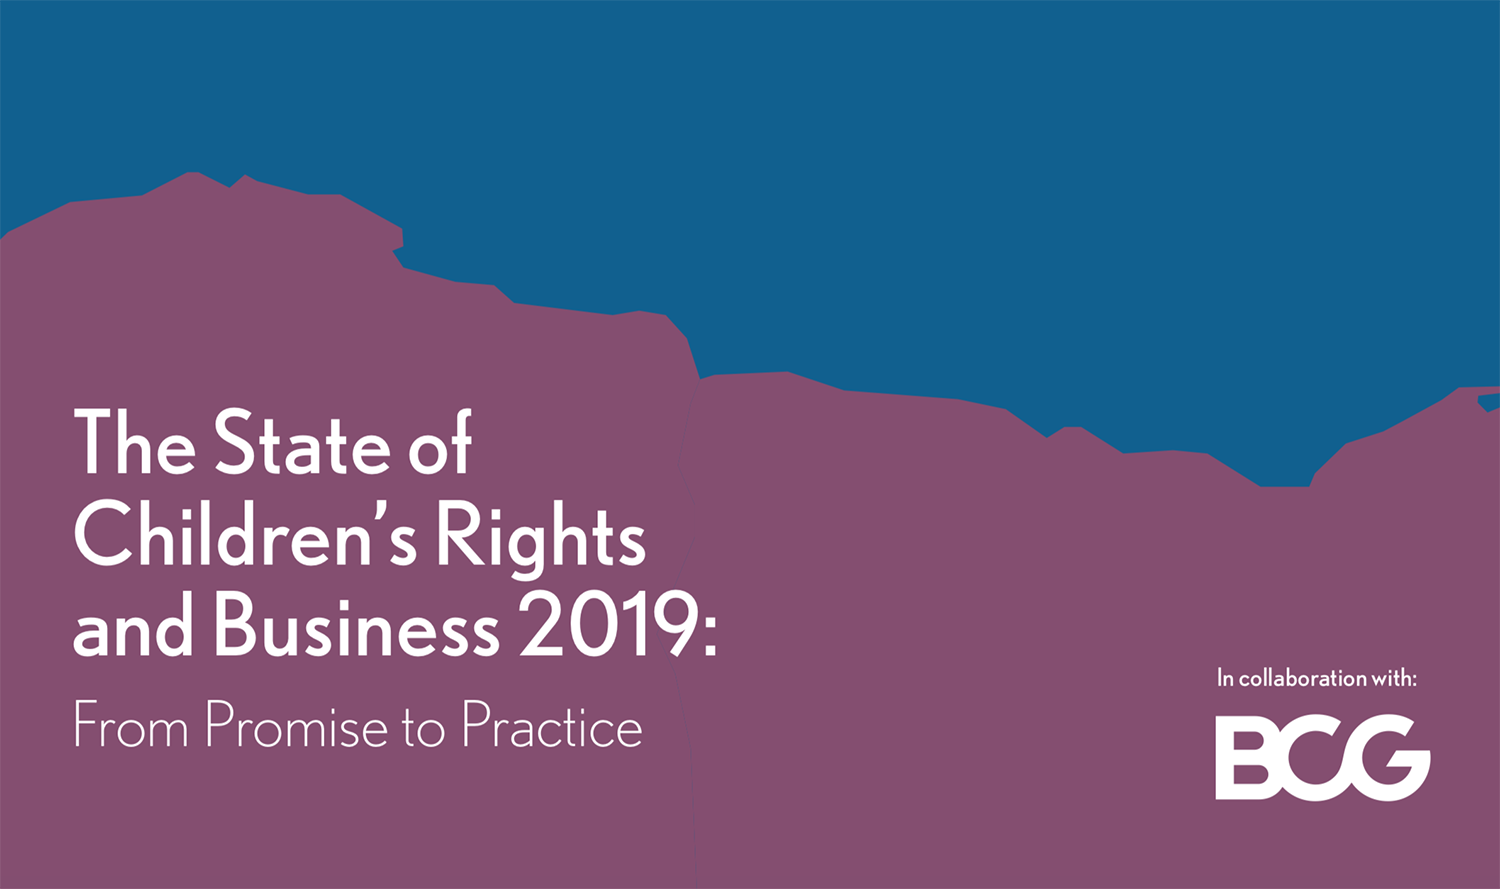 The State of Children's Rights and Business 2019: From Promise to Practice